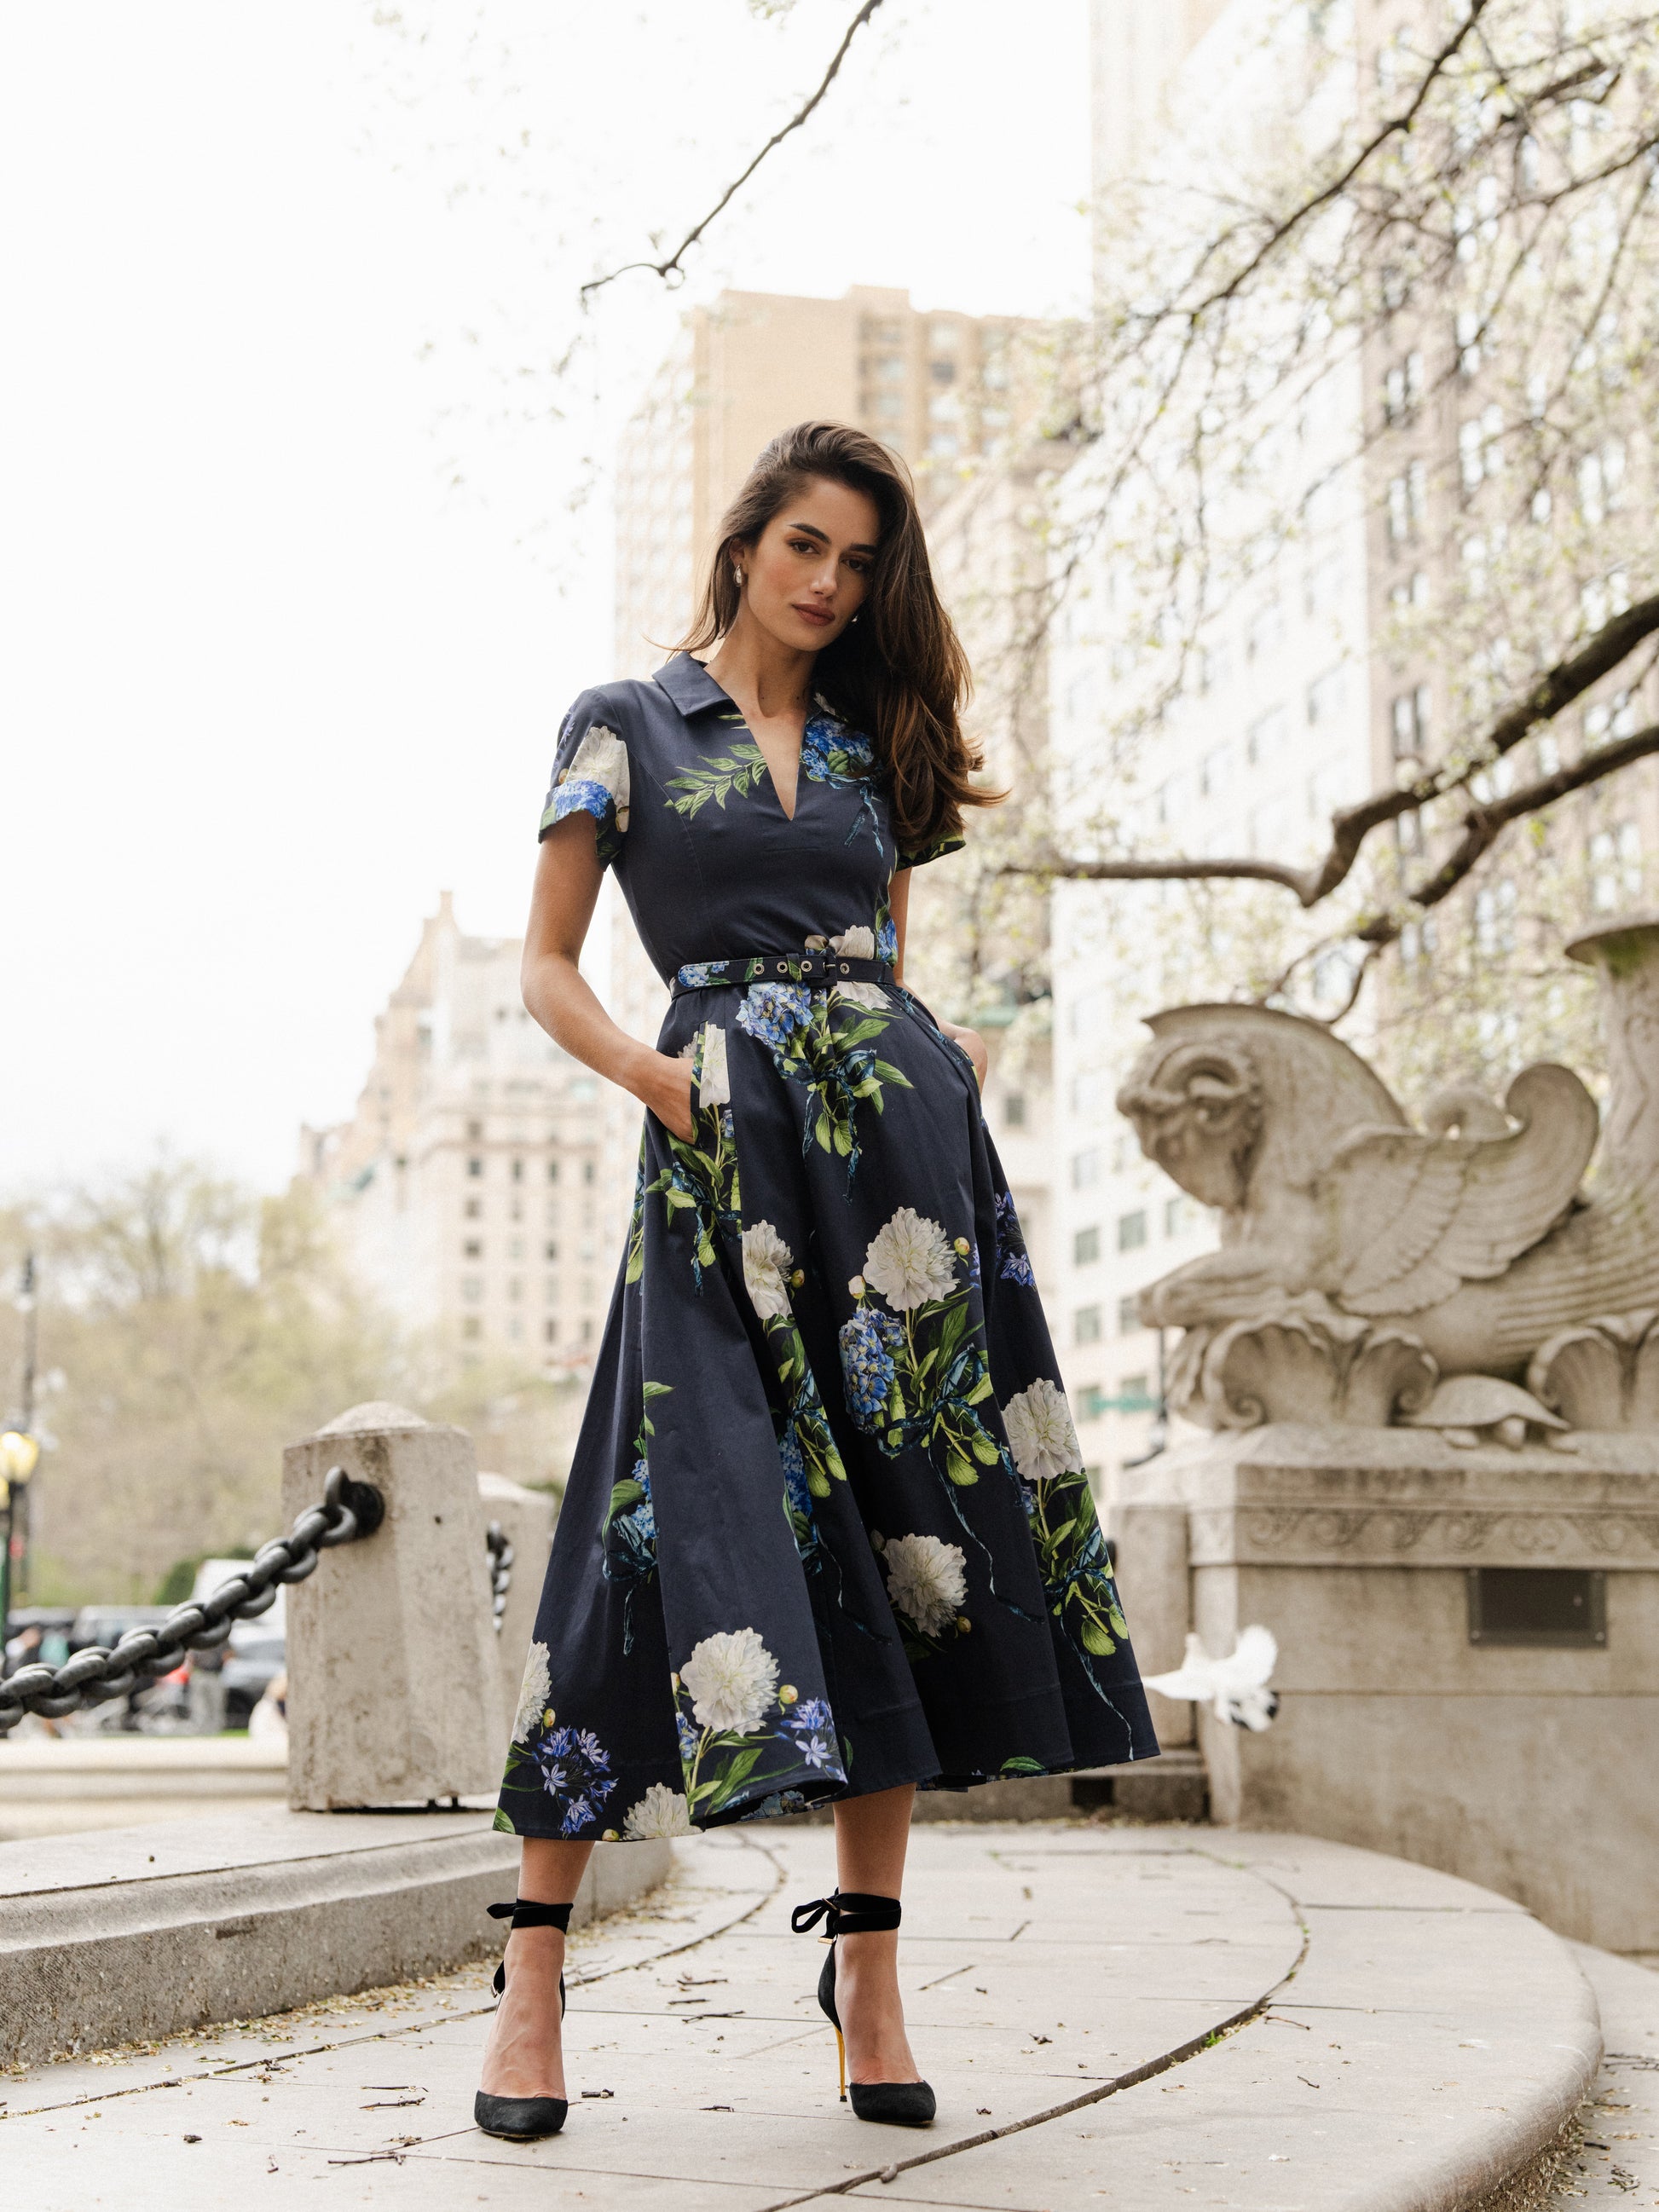 Monique Lhuillier Fall 2024 night sky floral collared, short sleeve dress with pockets, belted waist and midi a-line skirt - look book photo.